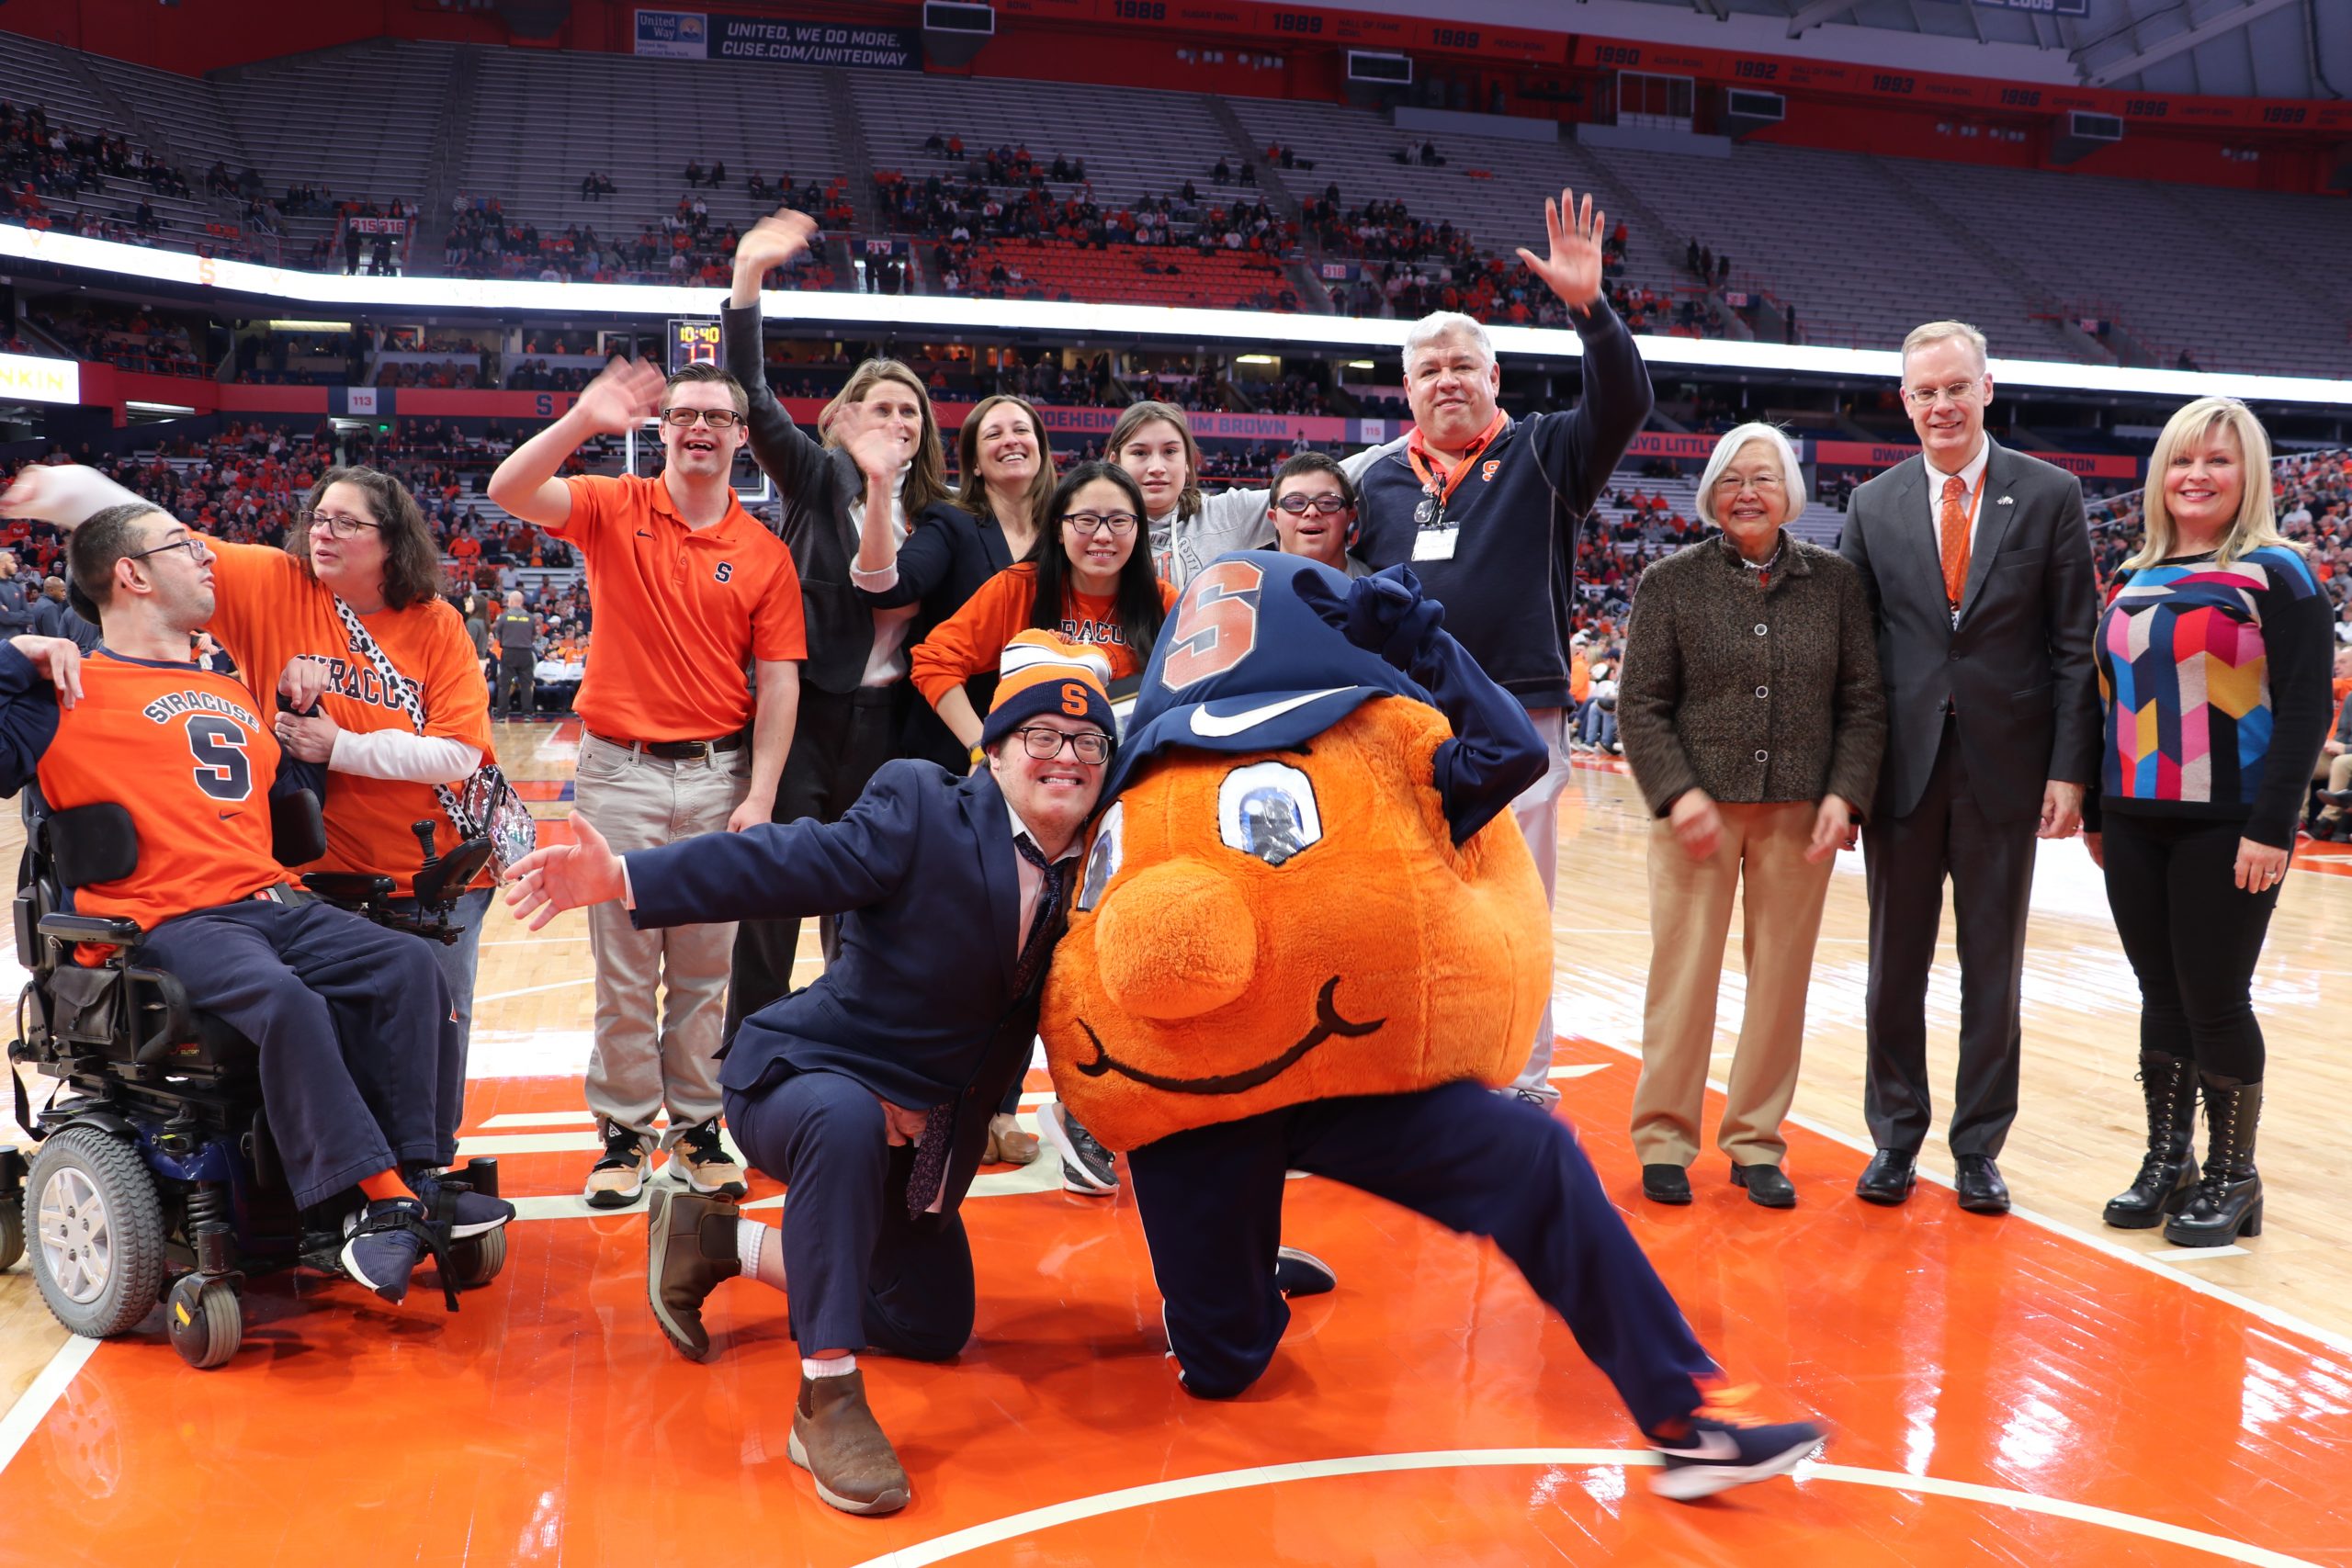 inclusive u students, staff, and board members pose with otto the orange on the dome basketball court